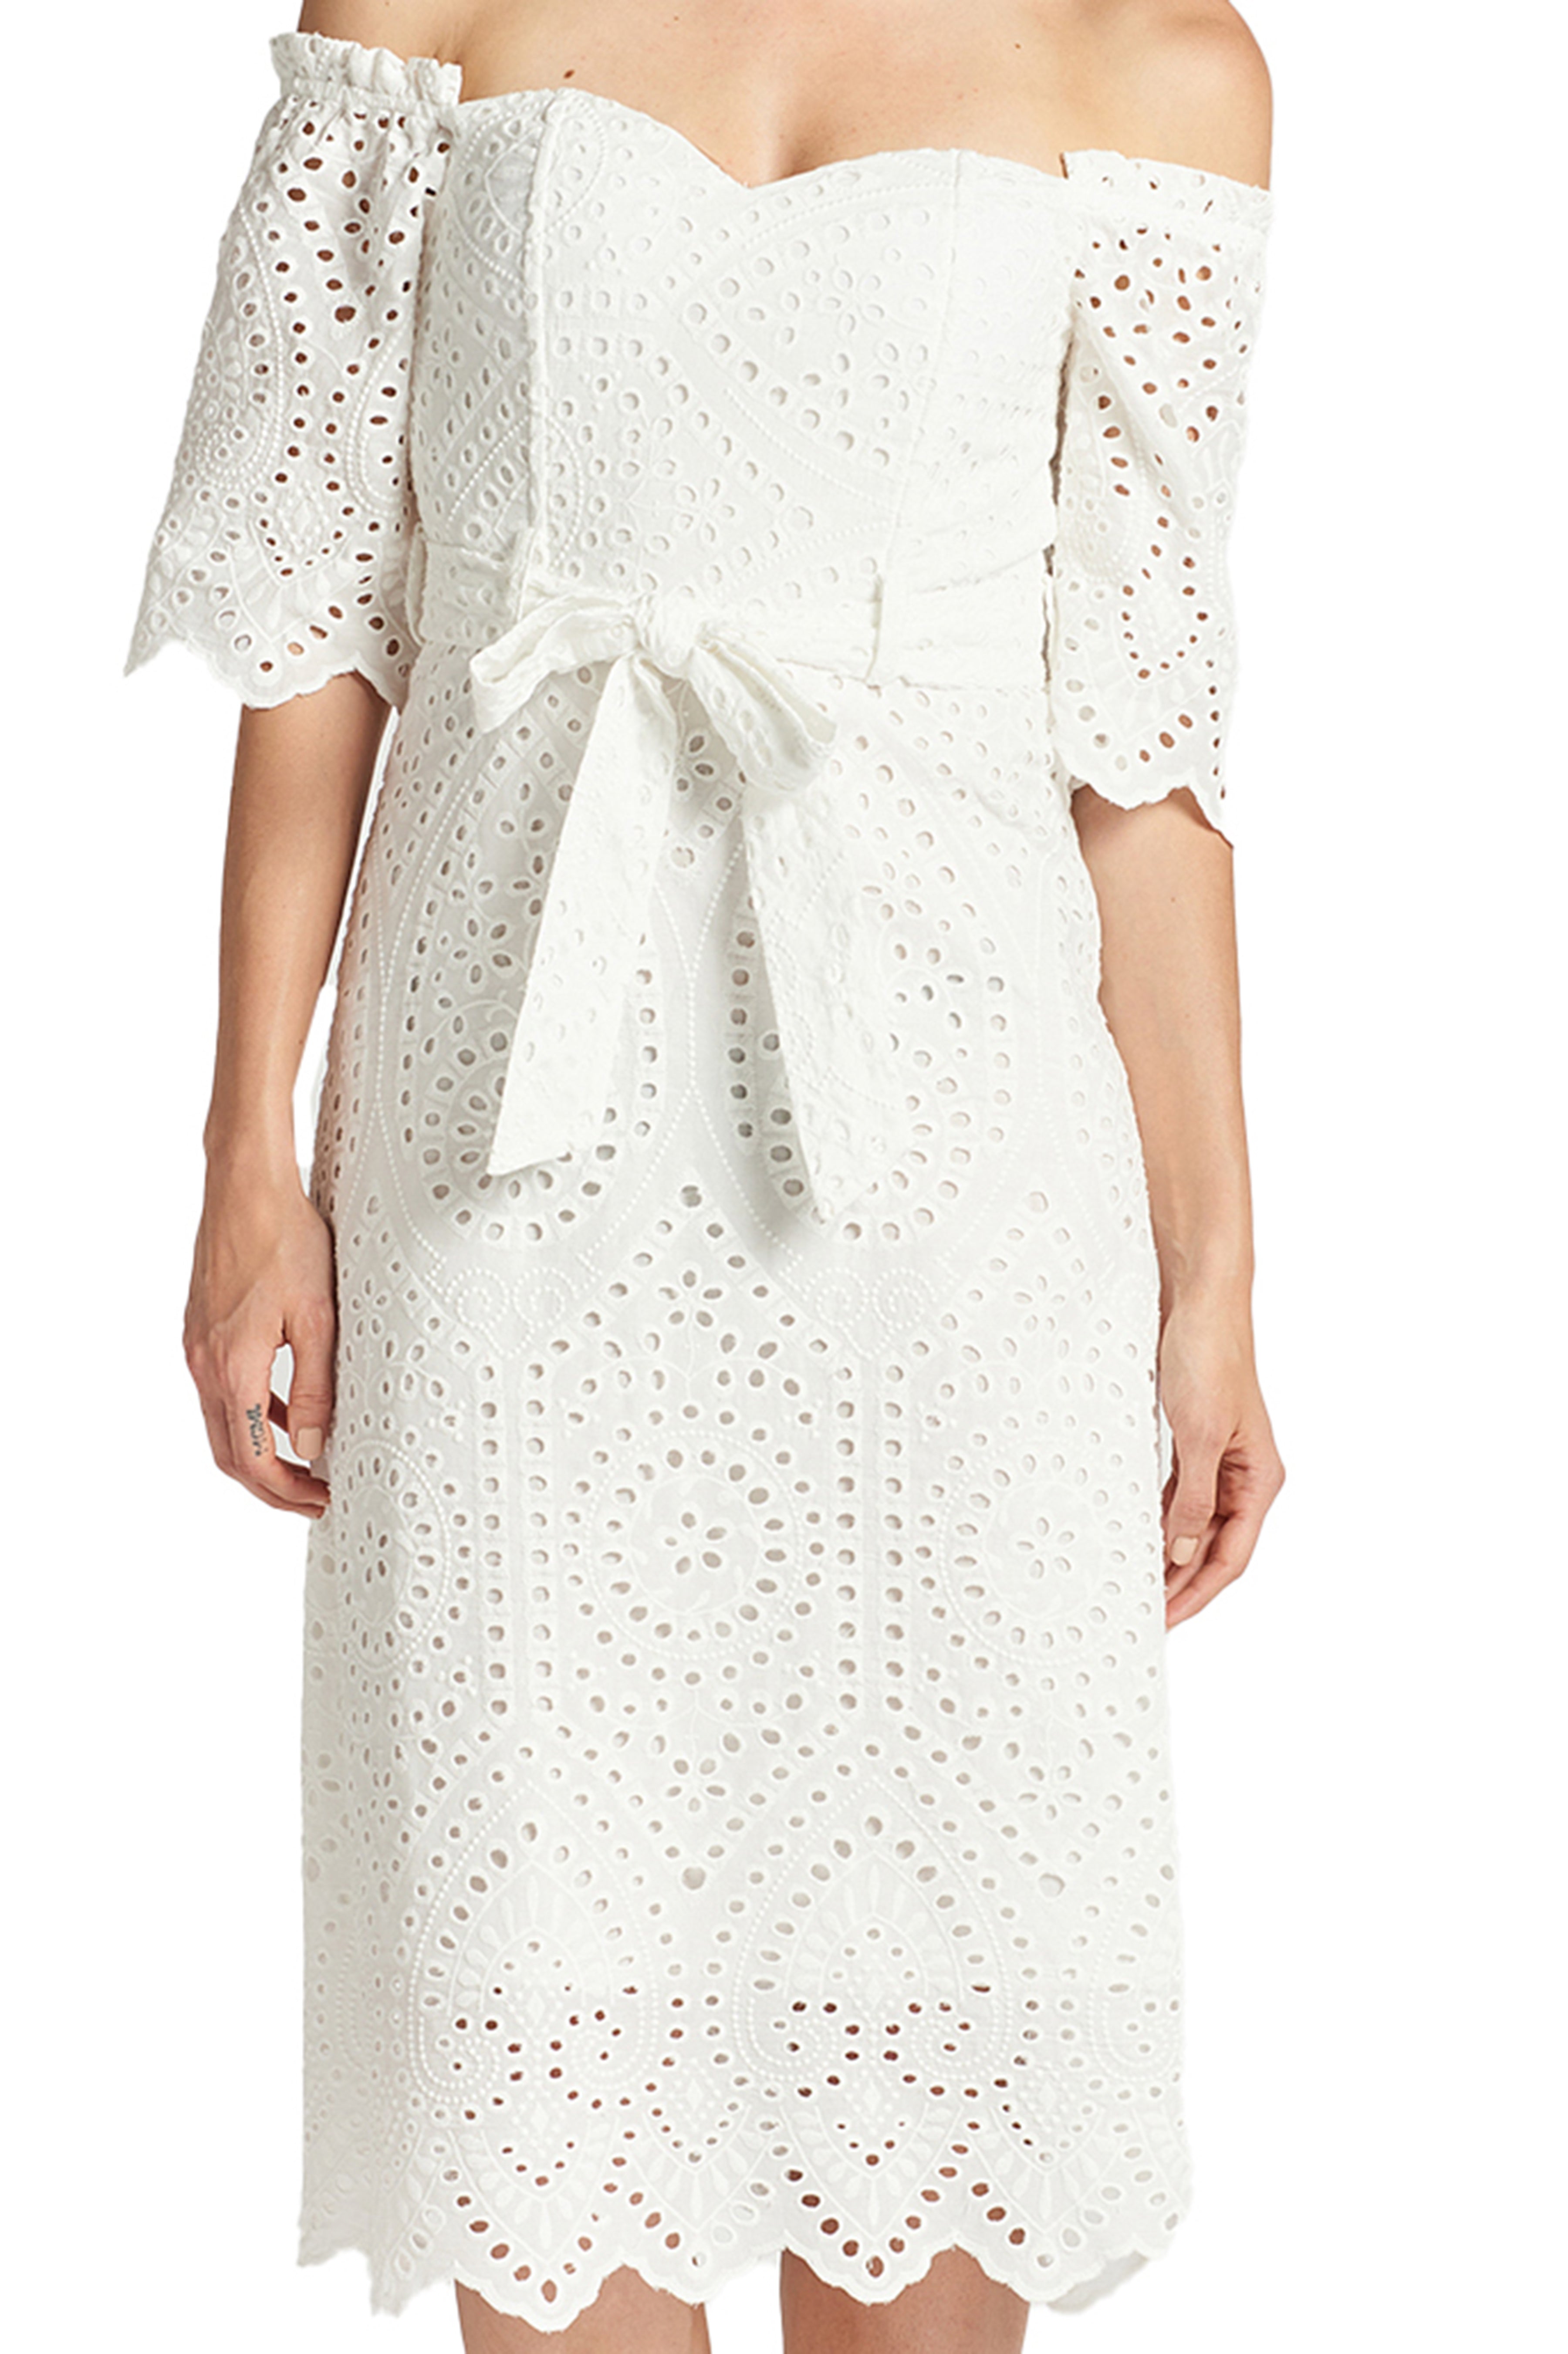 Close-up front view of model wearing the Simona Maghen Jasmine Dress, white cotton scalloped eyelet midi a-line dress with off the shoulder sweetheart neckline, self belt, and short sleeves.